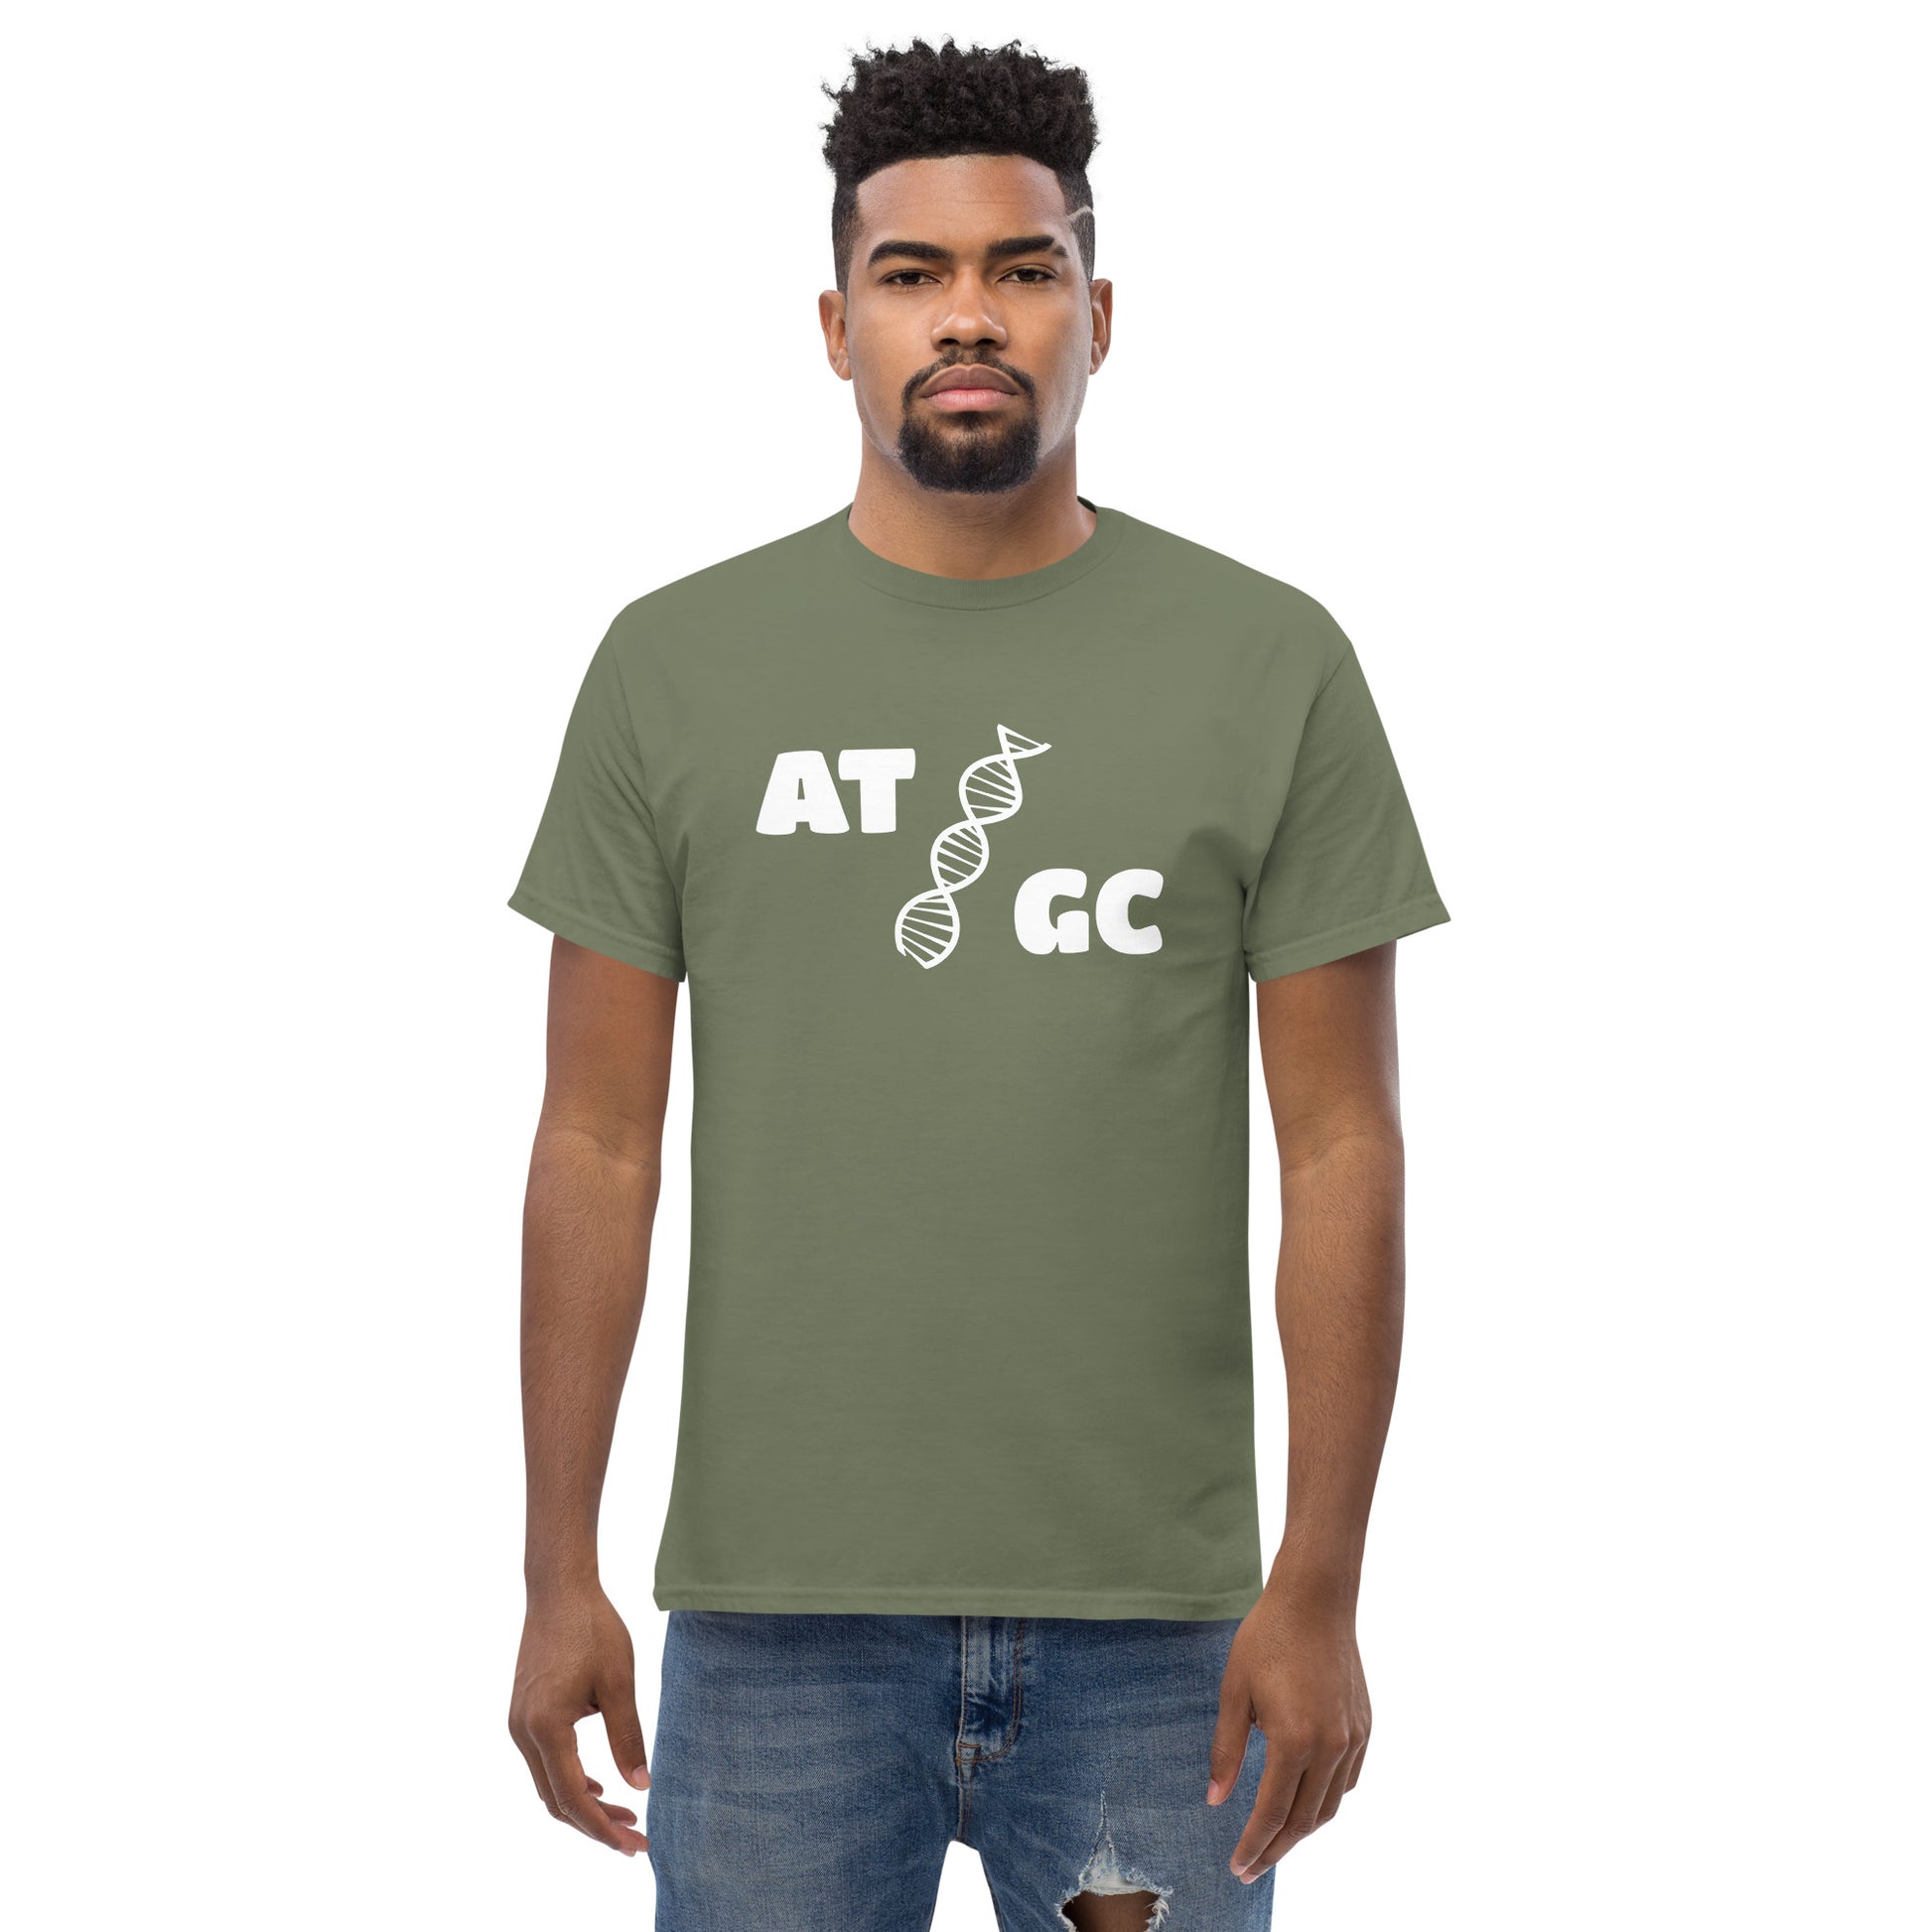 Men with military green t-shirt with image of a DNA string and the text "ATGC"